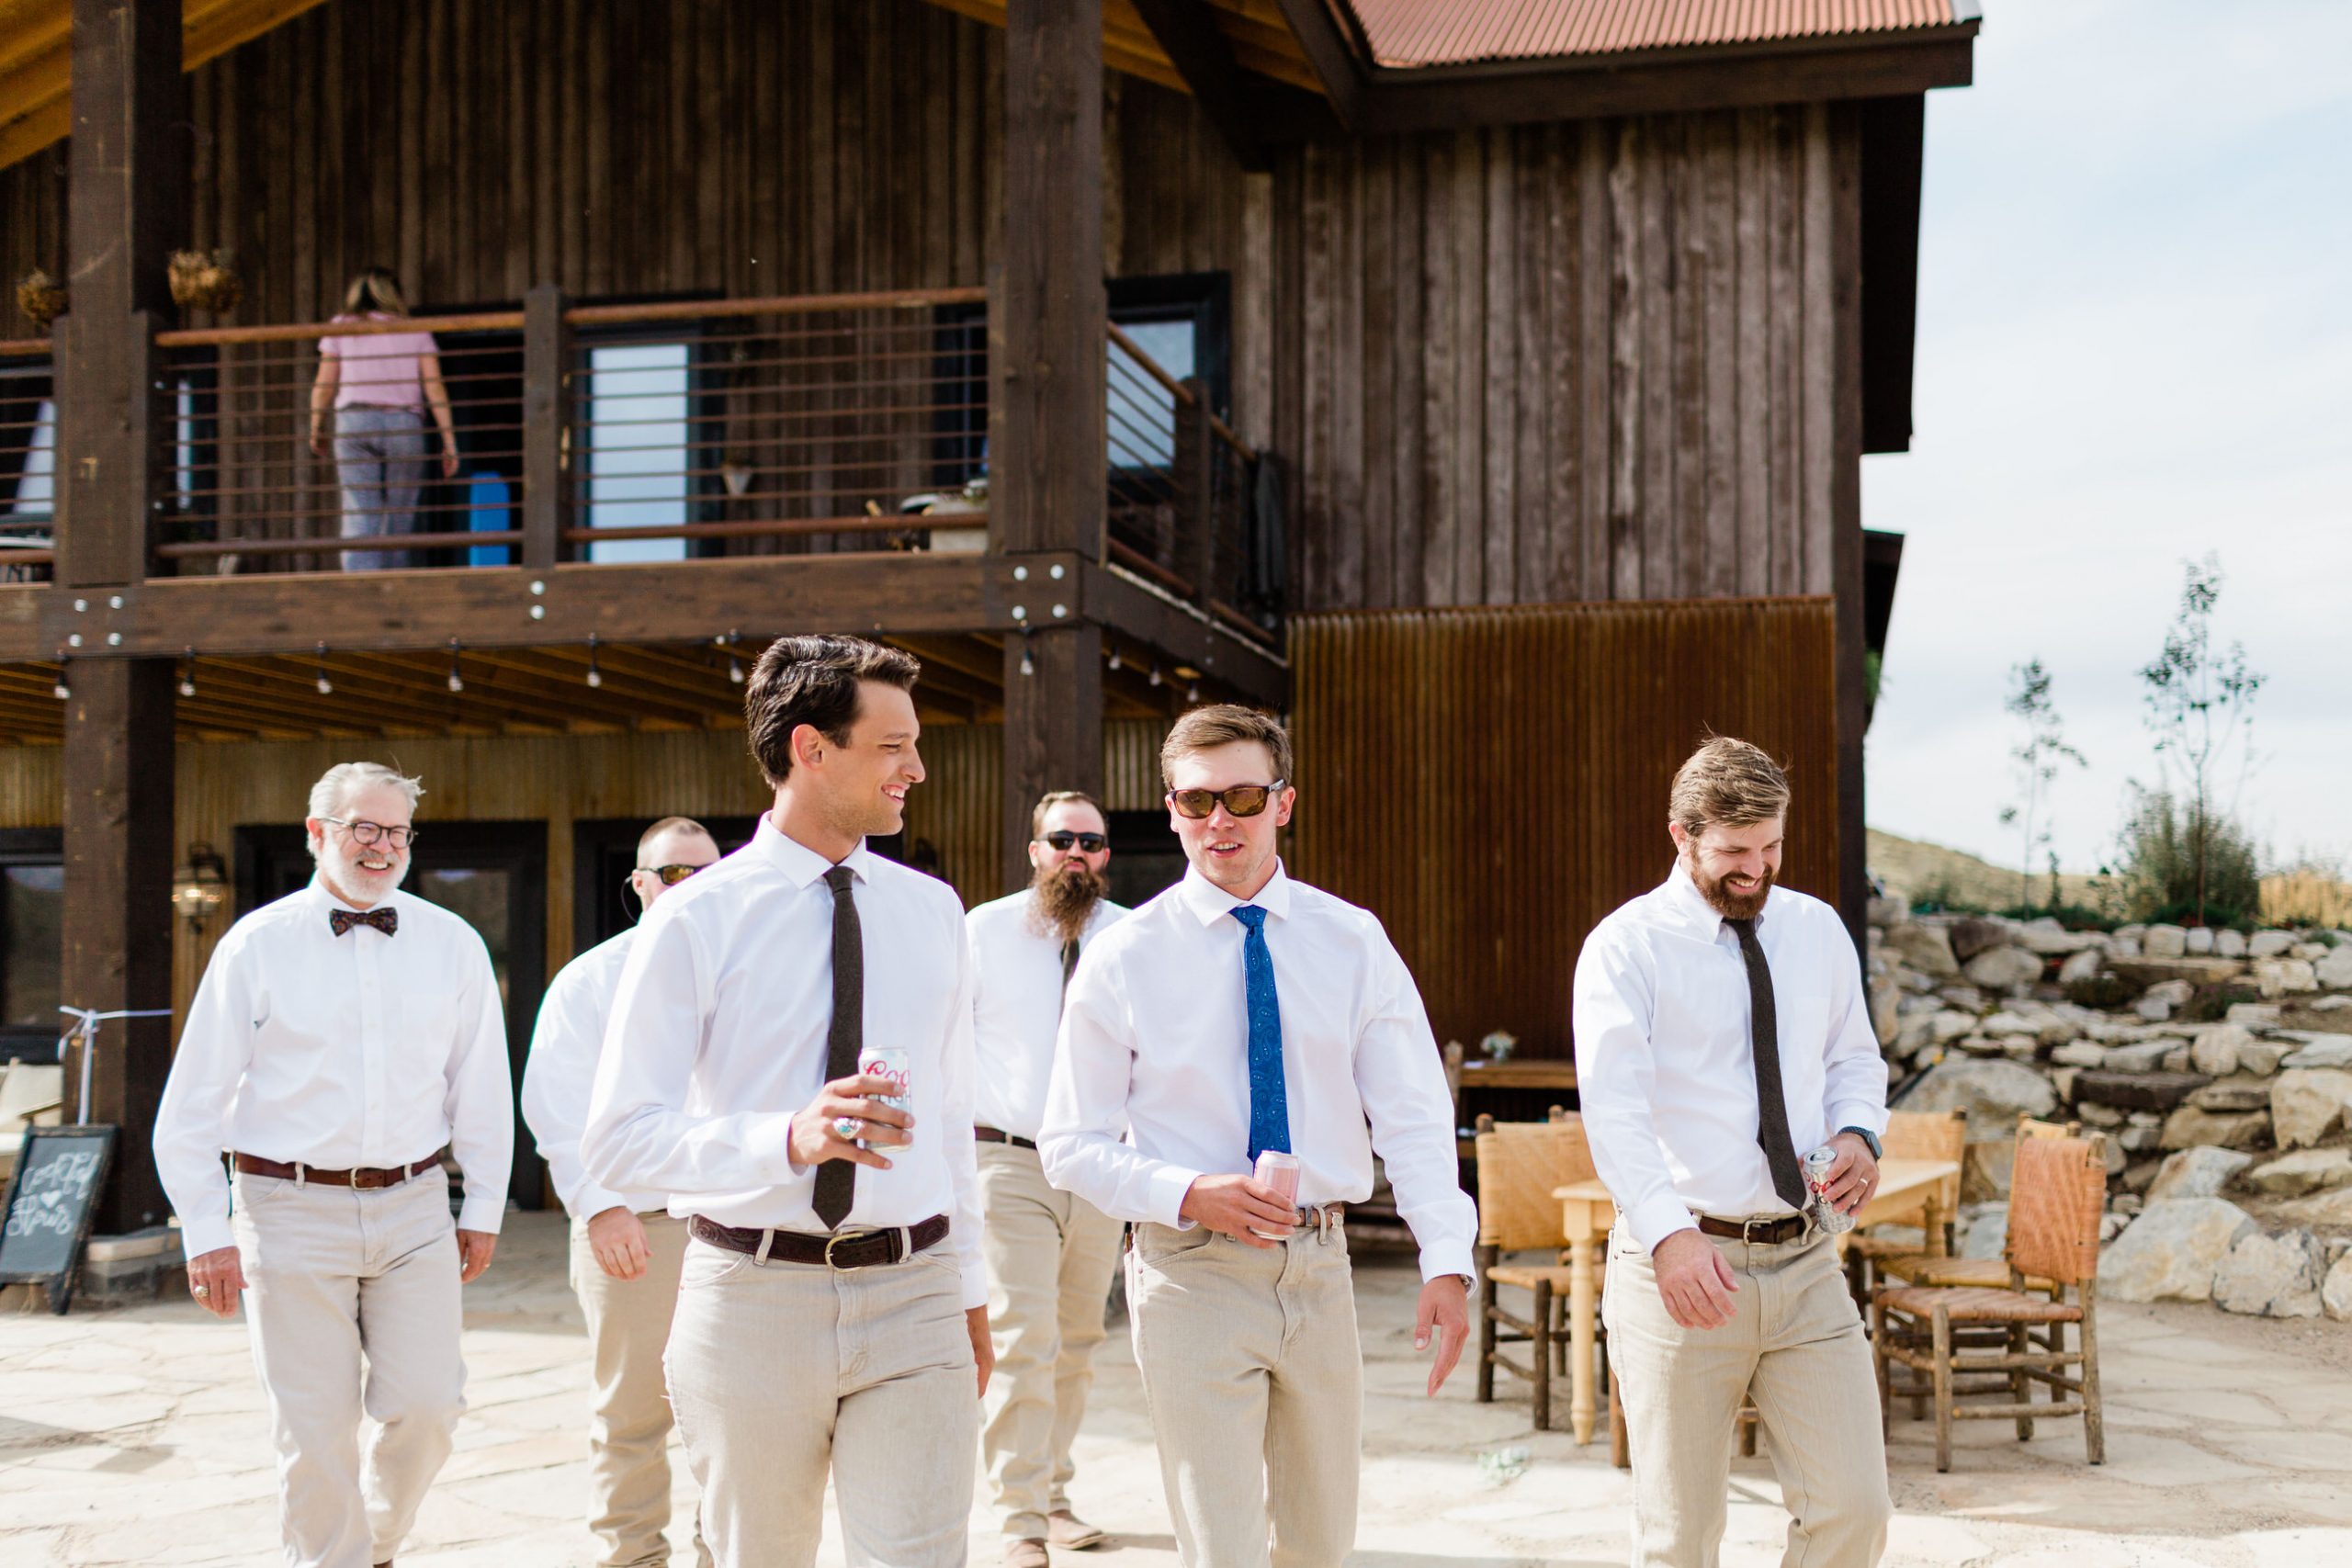 groomsmen pose with instruments for portrait